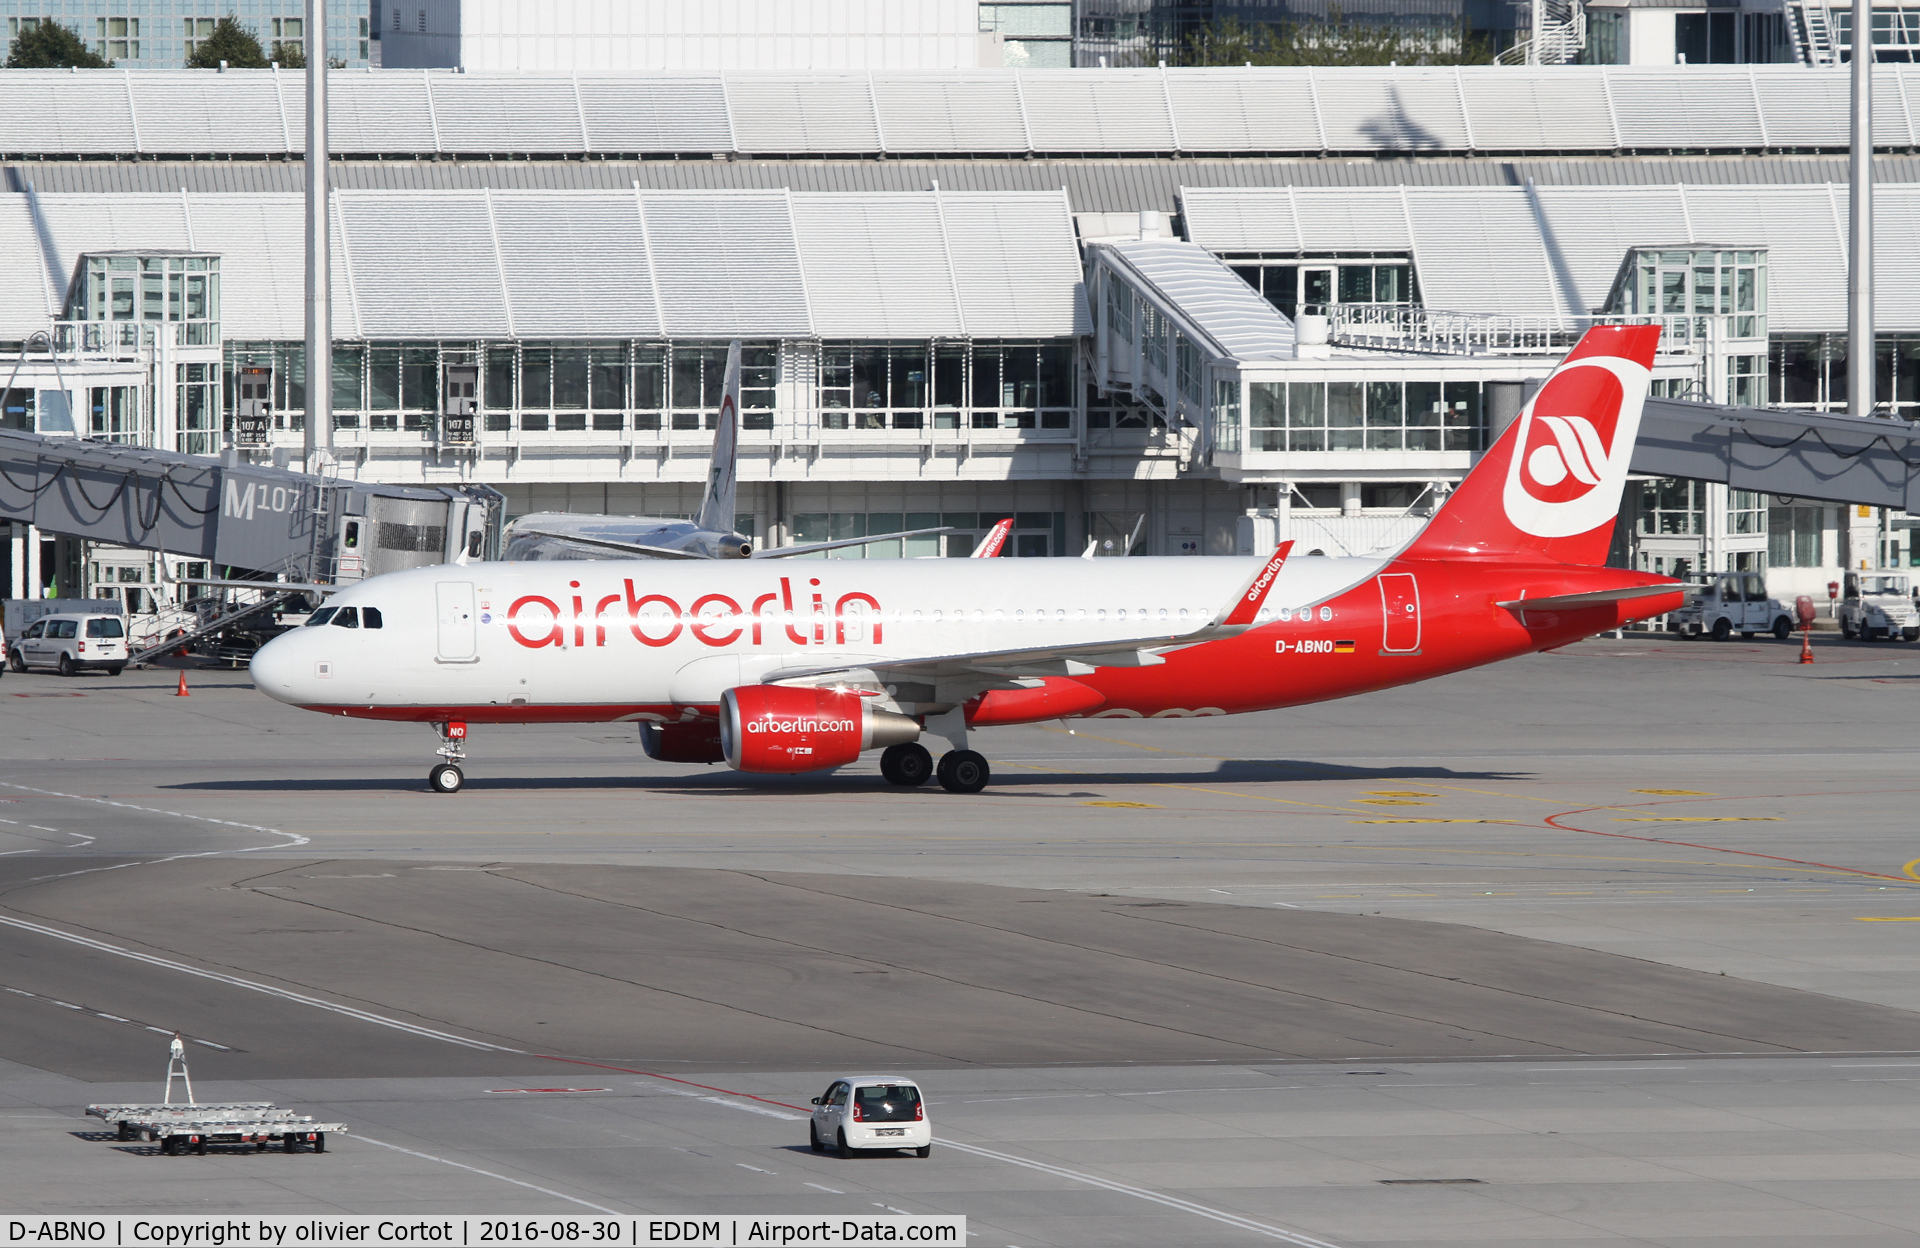 D-ABNO, 2015 Airbus A320-214 C/N 6831, taxiing at munich airport